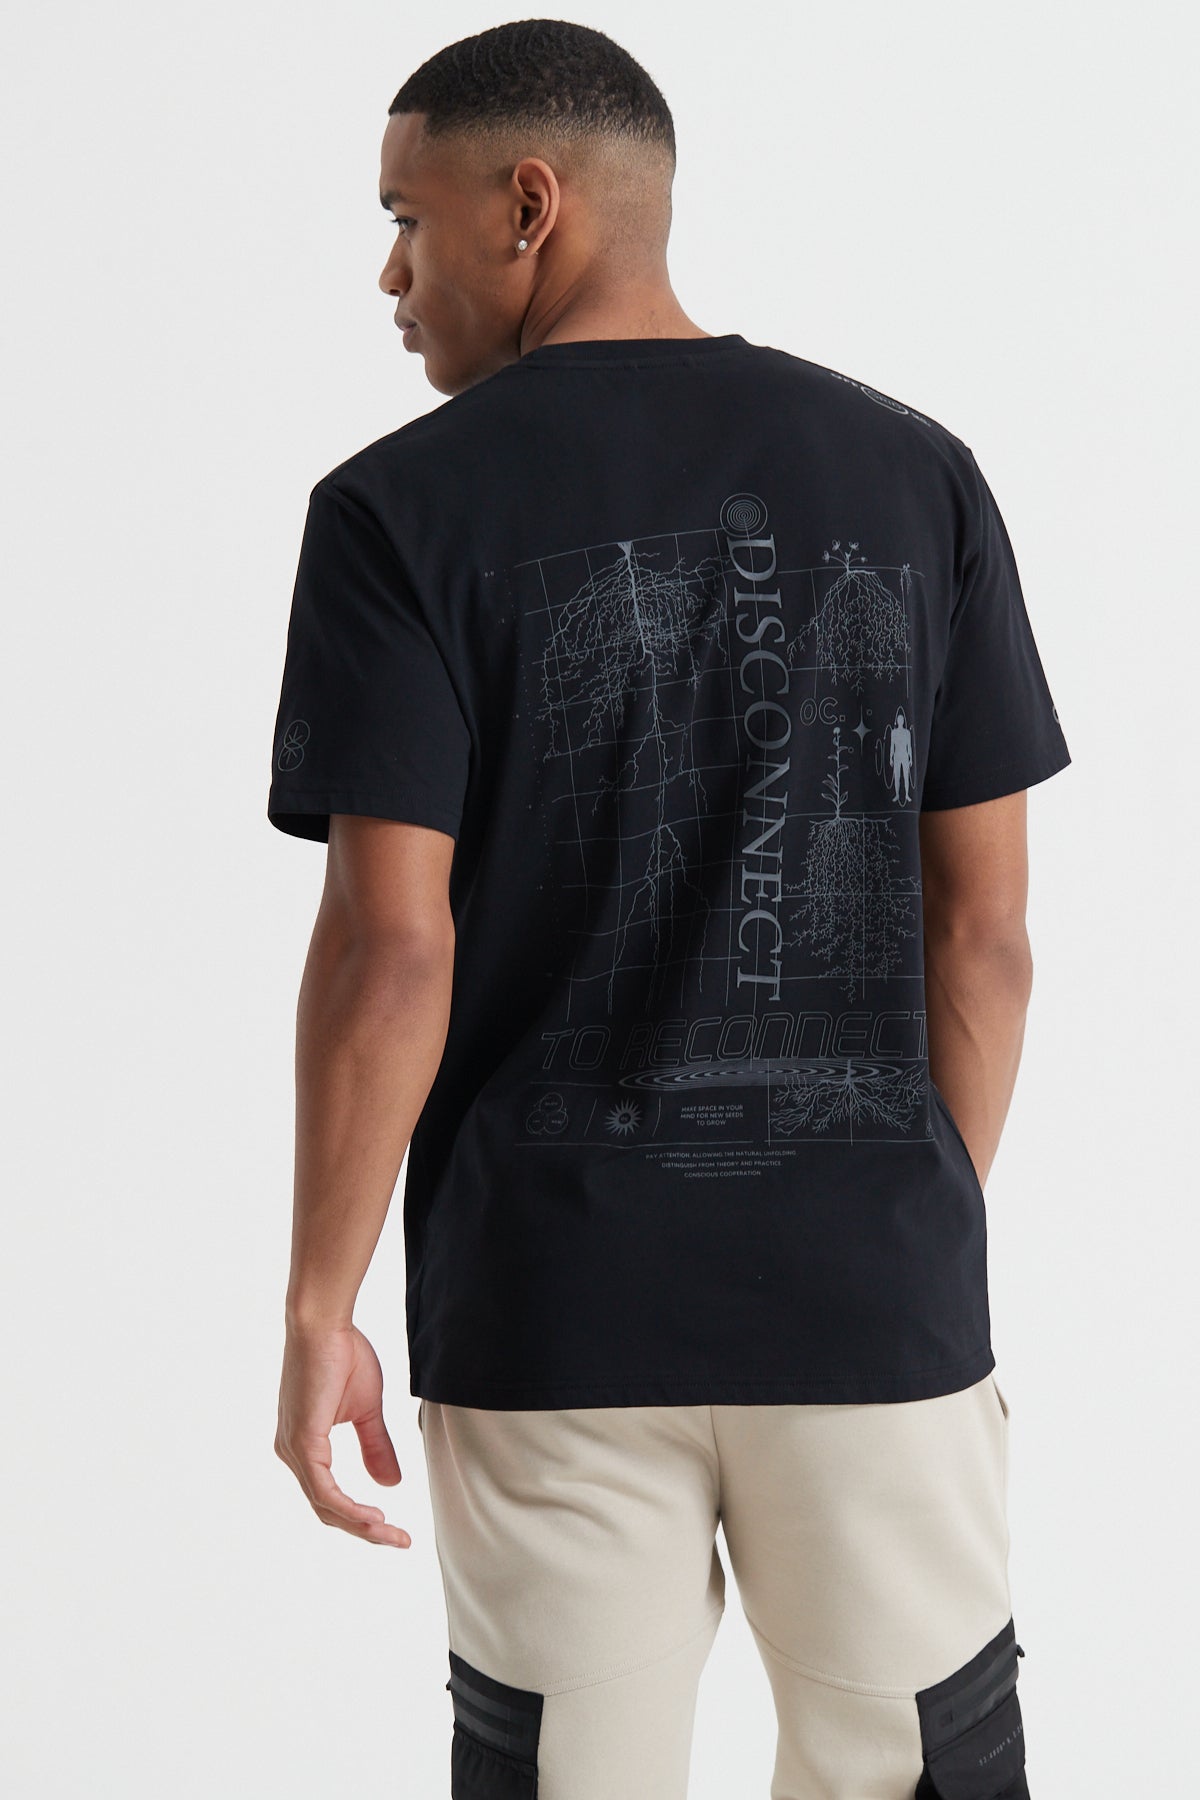 Disconnect to Reconnect T-shirt - Jet Black